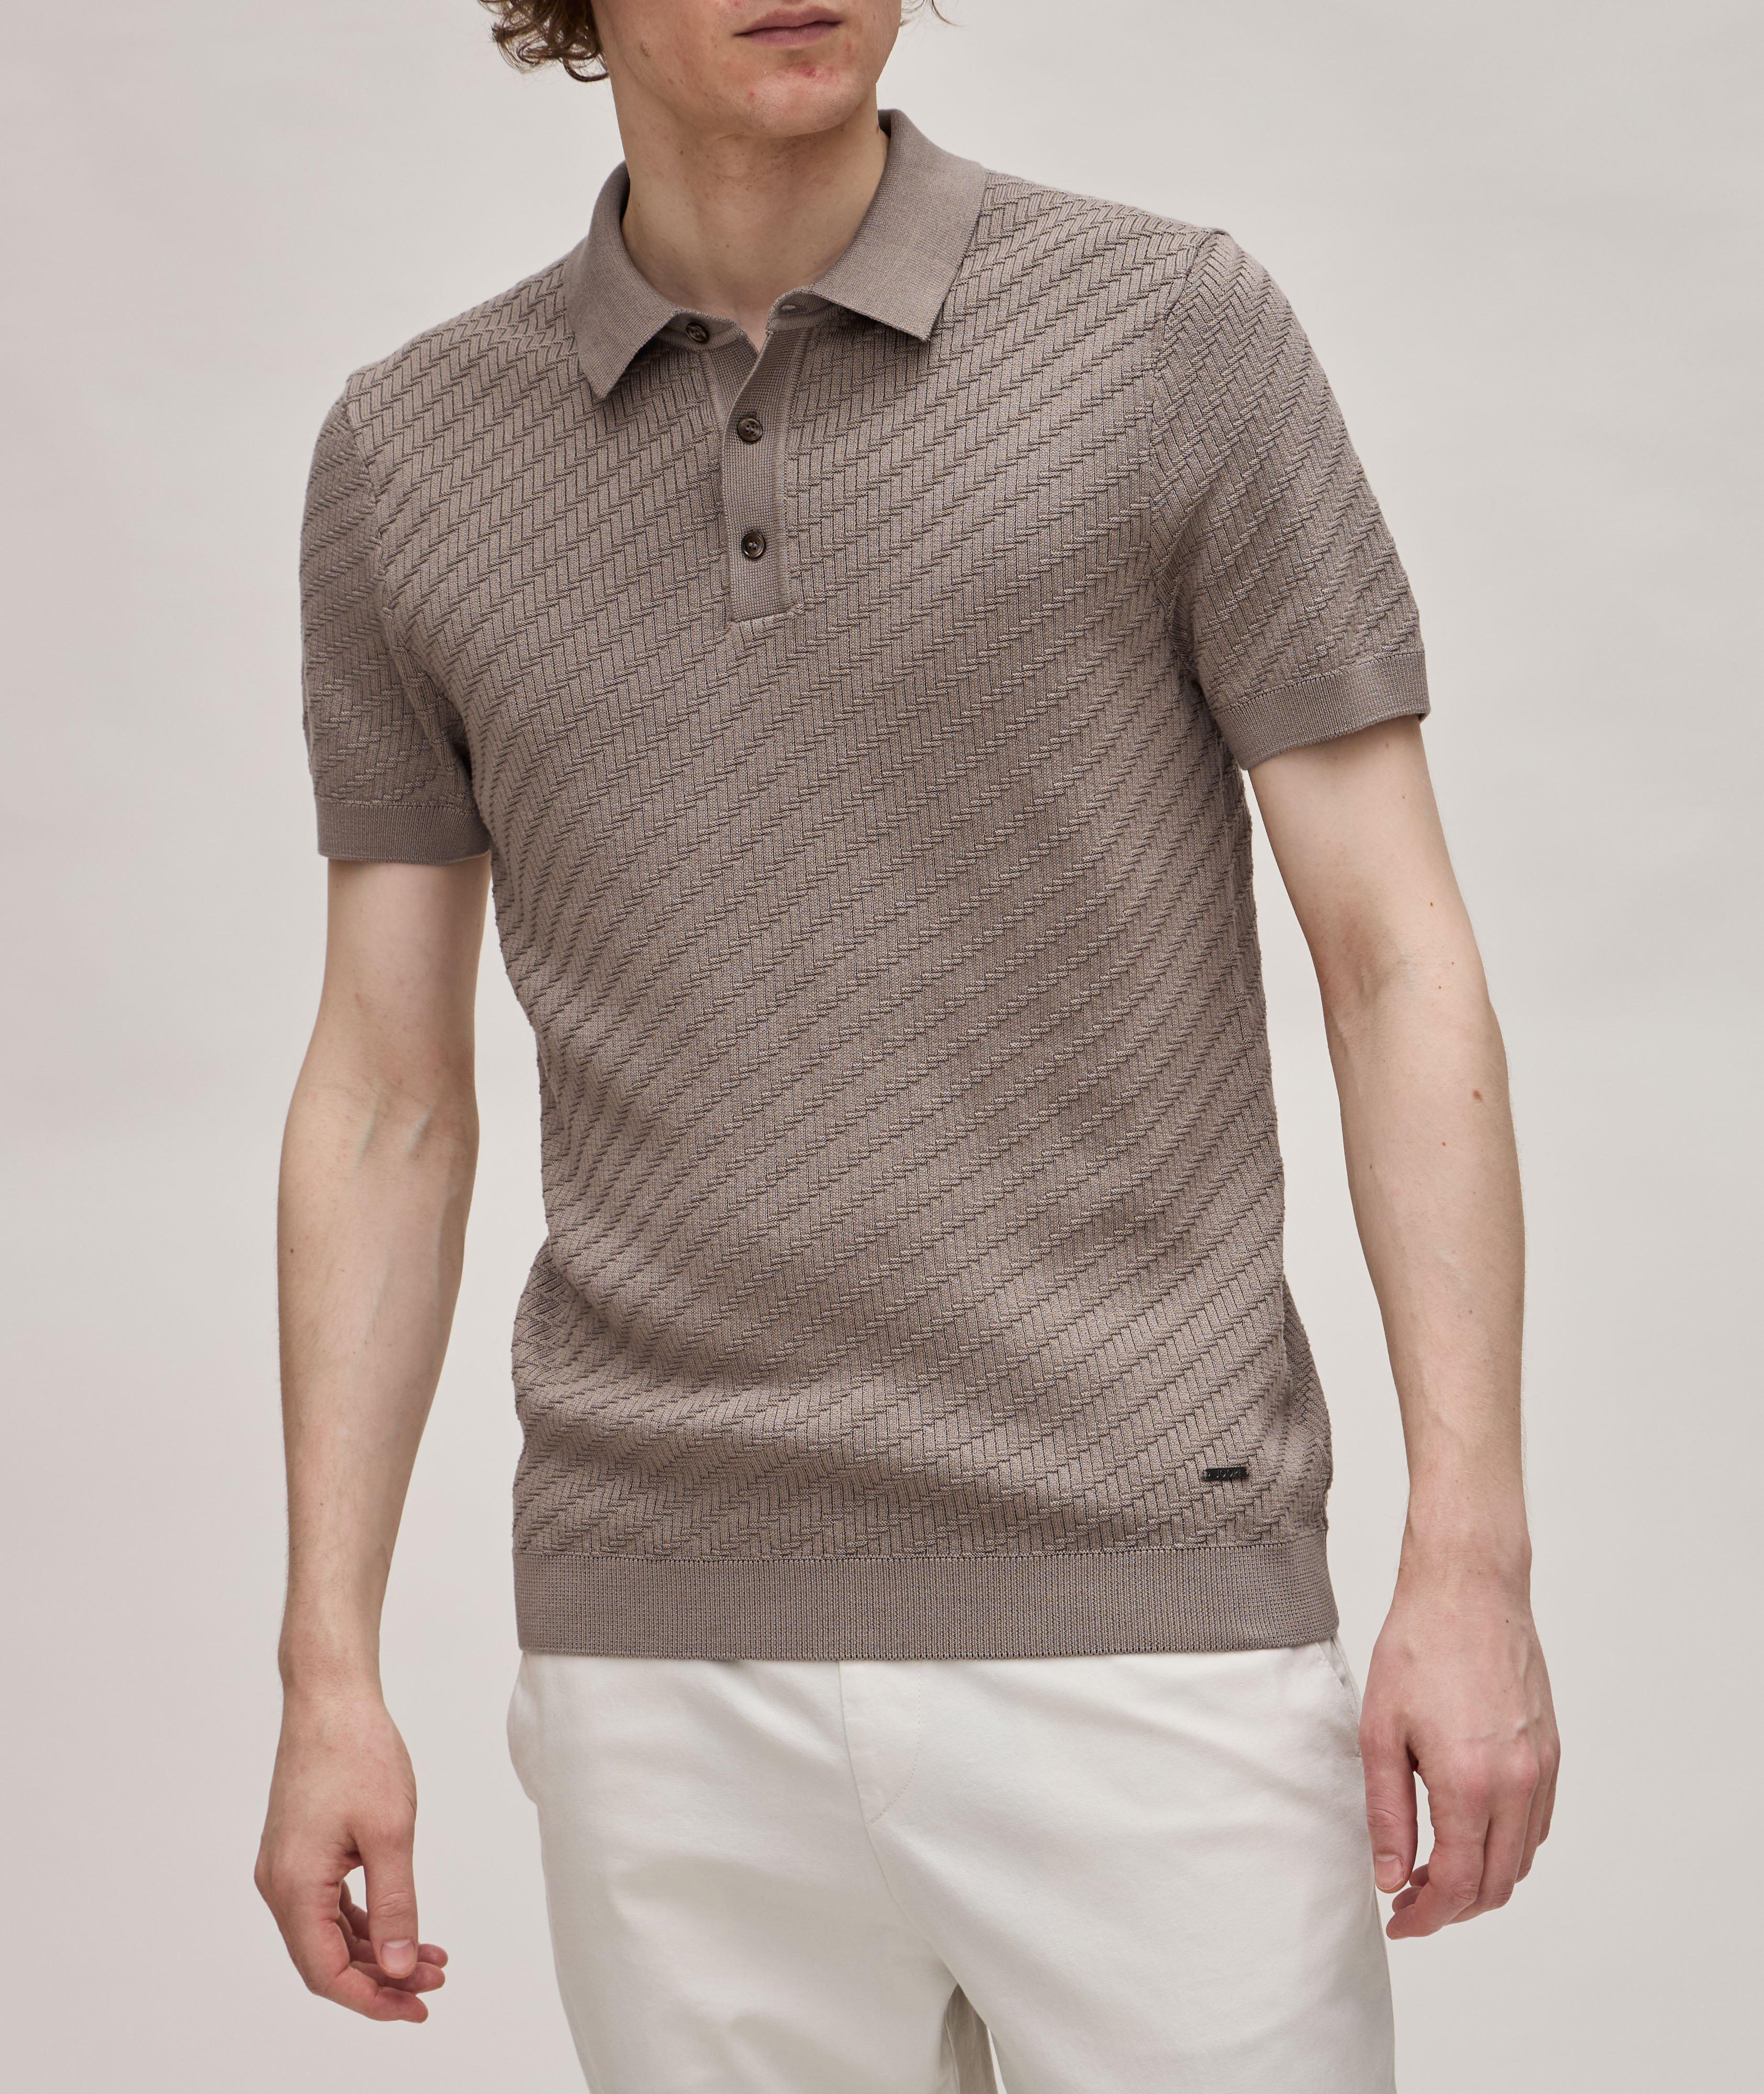 Maurice Textured Cotton Polo image 1